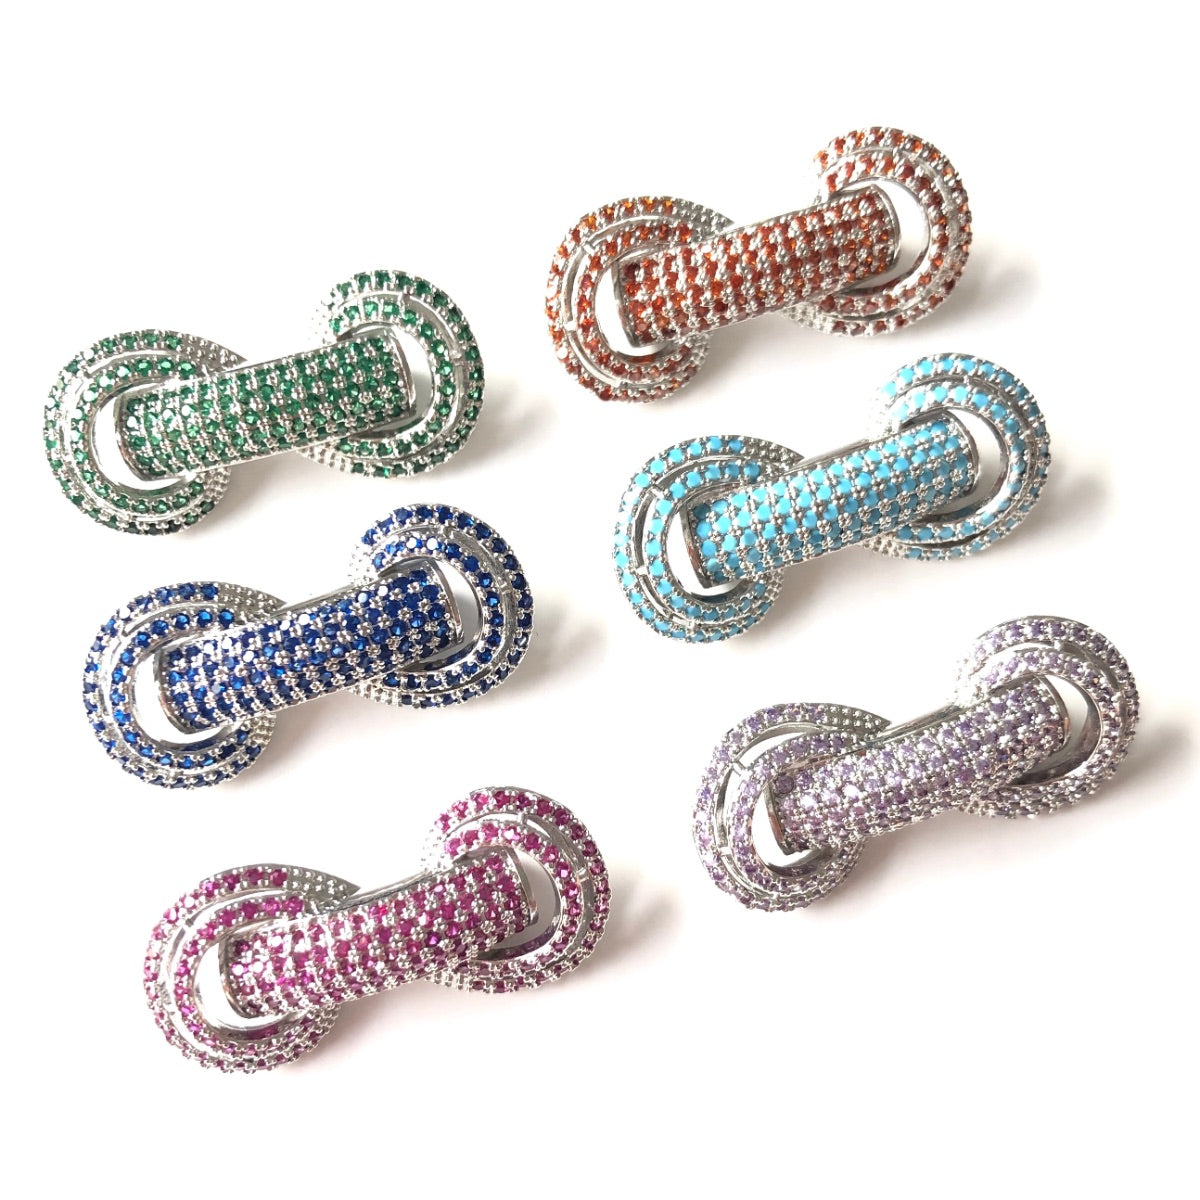 6pcs/lot 31*14.5*8mm Multicolor Purple Green Blue Fuchsia Reddish Orange Turquoise CZ Paved Tube Bar Spacers Mix Silver-6pcs CZ Paved Spacers Colorful Zirconia New Spacers Arrivals Tube Bar Centerpieces Charms Beads Beyond